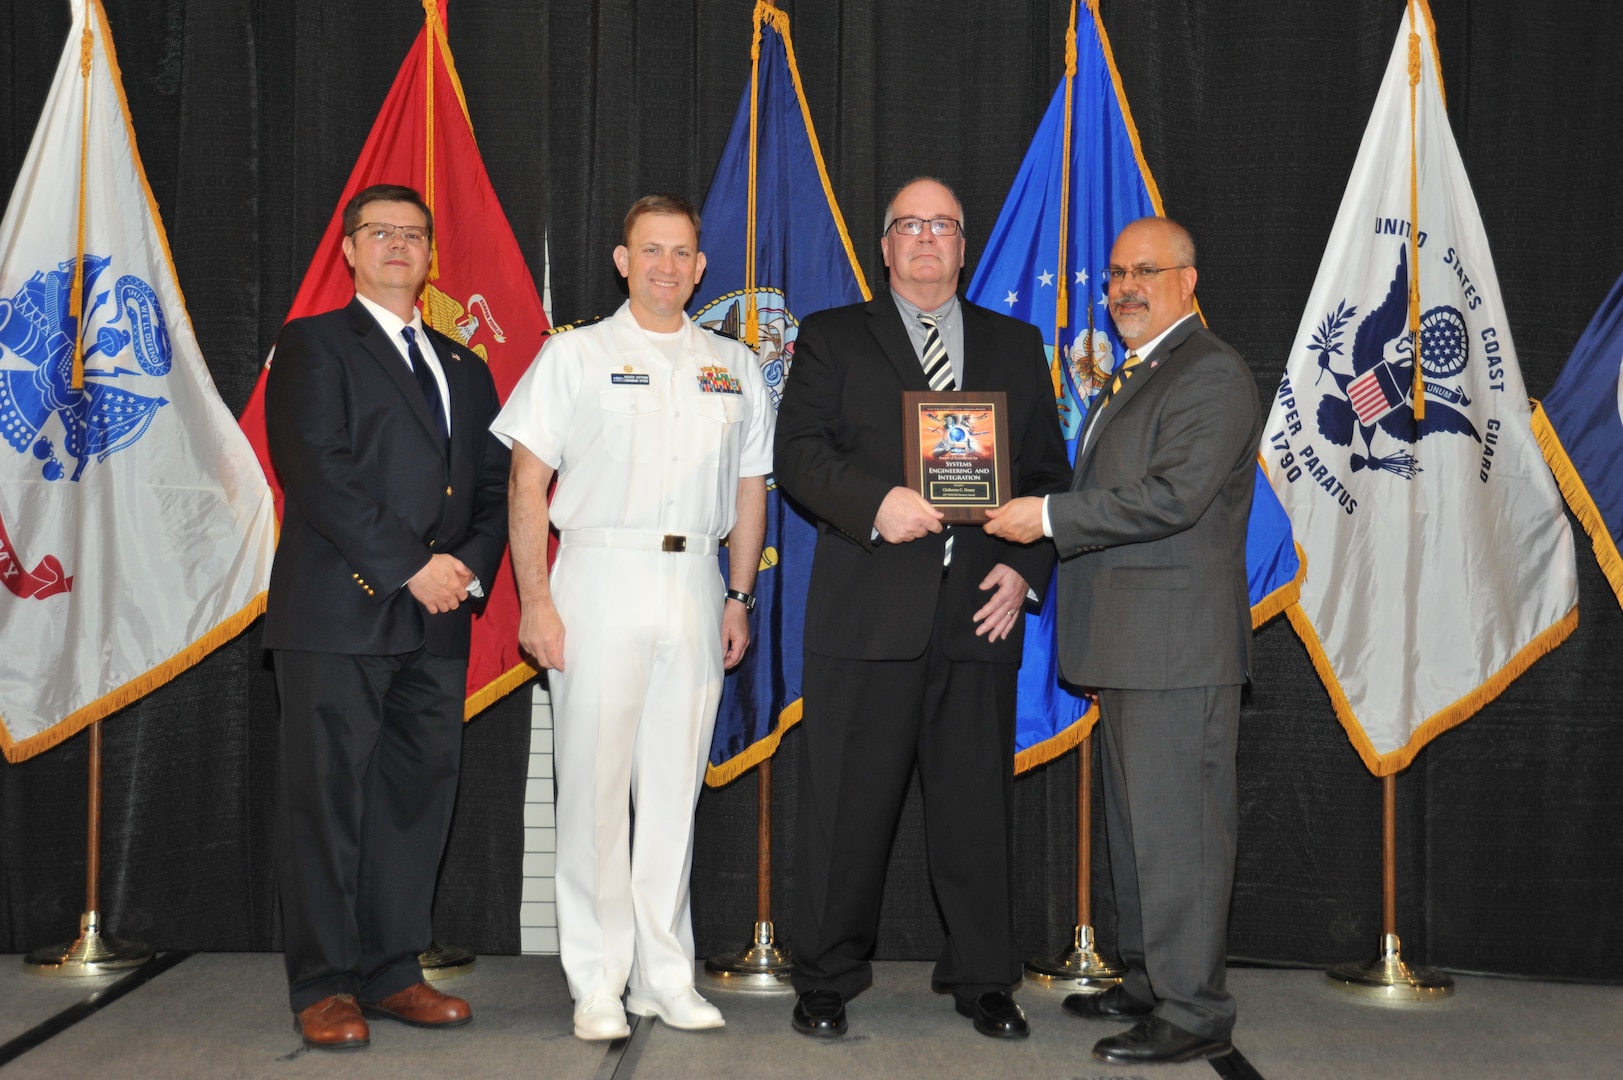 IMAGE: Claiborne Doxey is presented the Award of Excellence for Systems Engineering and Integration at Naval Surface Warfare Center Dahlgren Division's annual awards ceremony, Apr. 26 at the Fredericksburg Expo and Conference Center.

The Award of Excellence for Systems Engineering and Integration was established to recognize individuals who have made a notable and significant impact to NSWCDD through their outstanding performance in systems engineering and integration.